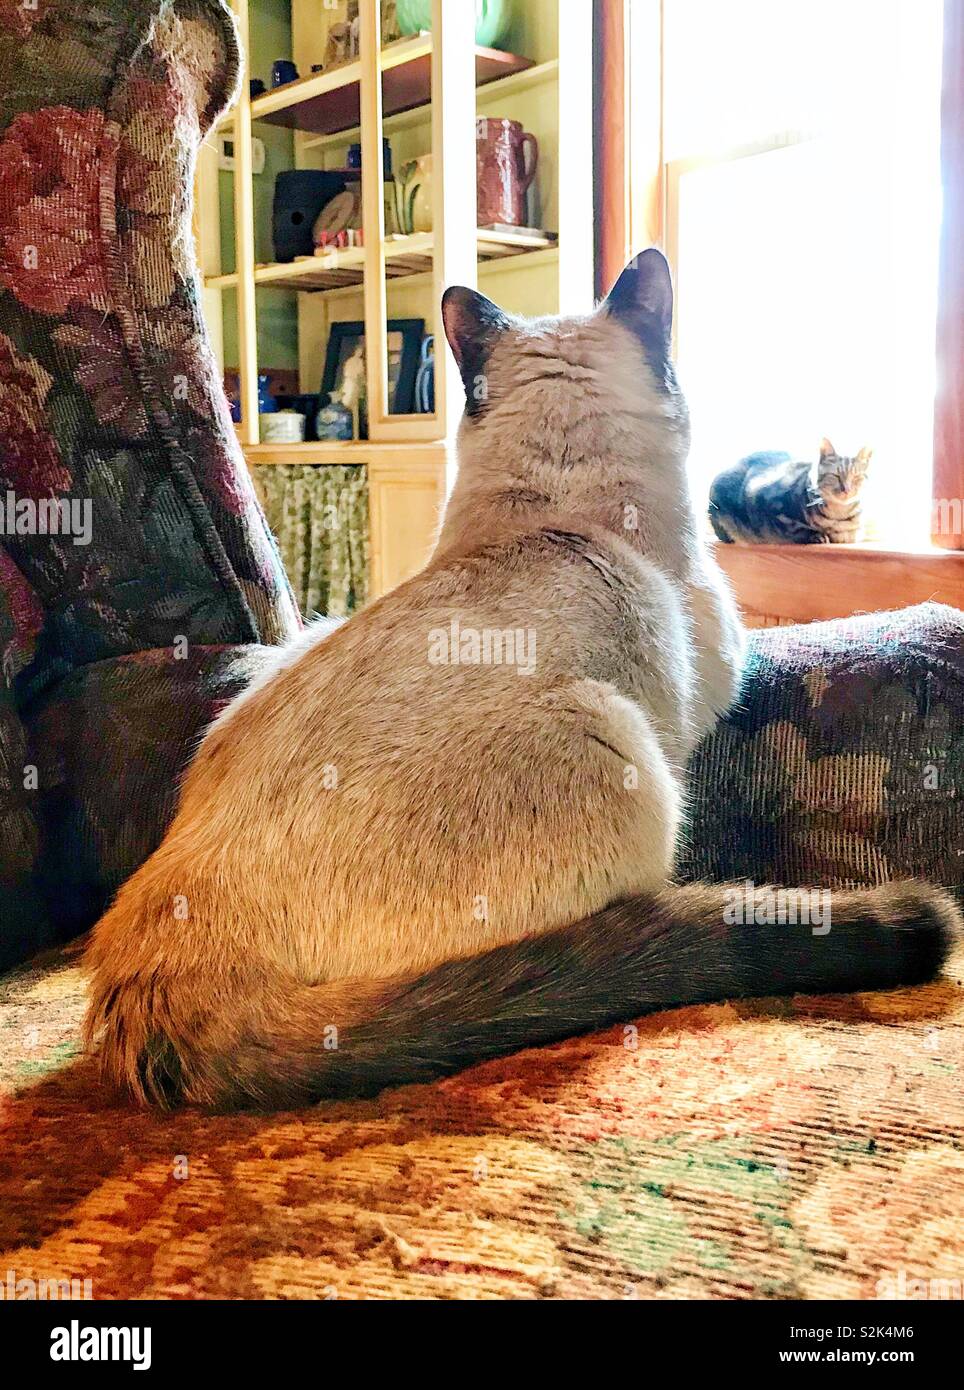 Sunny photo of Siamese tomcat in easy chair acknowledging sunlit tabby tomcat in window Stock Photo